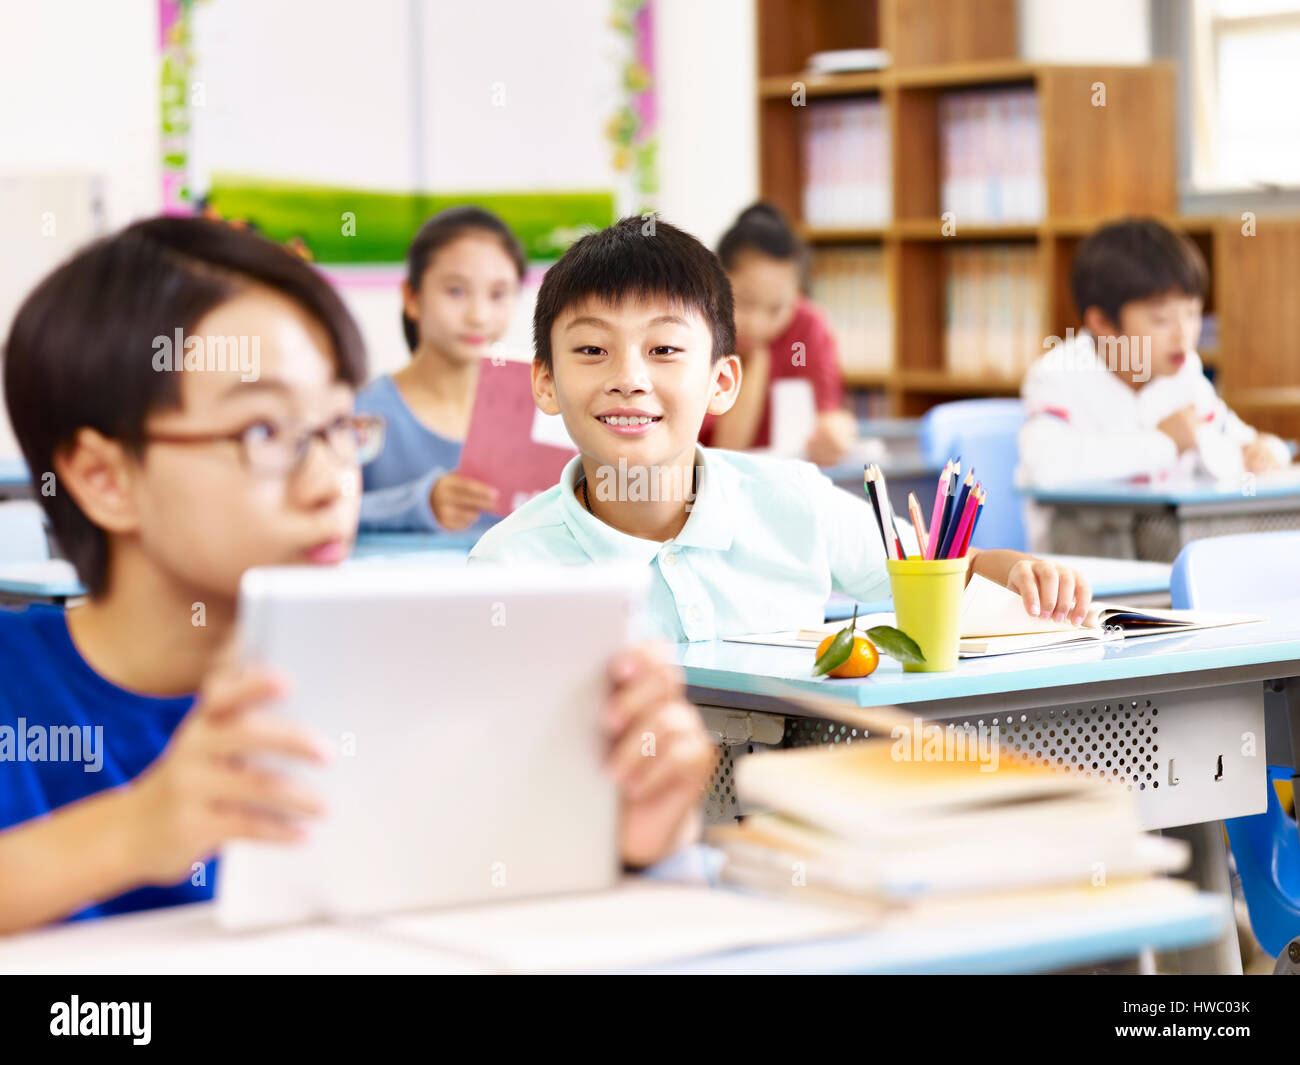 asian elementary schoolboy looking with curiosity at a tablet computer held by his classmate, focus on the boy in background. Stock Photo